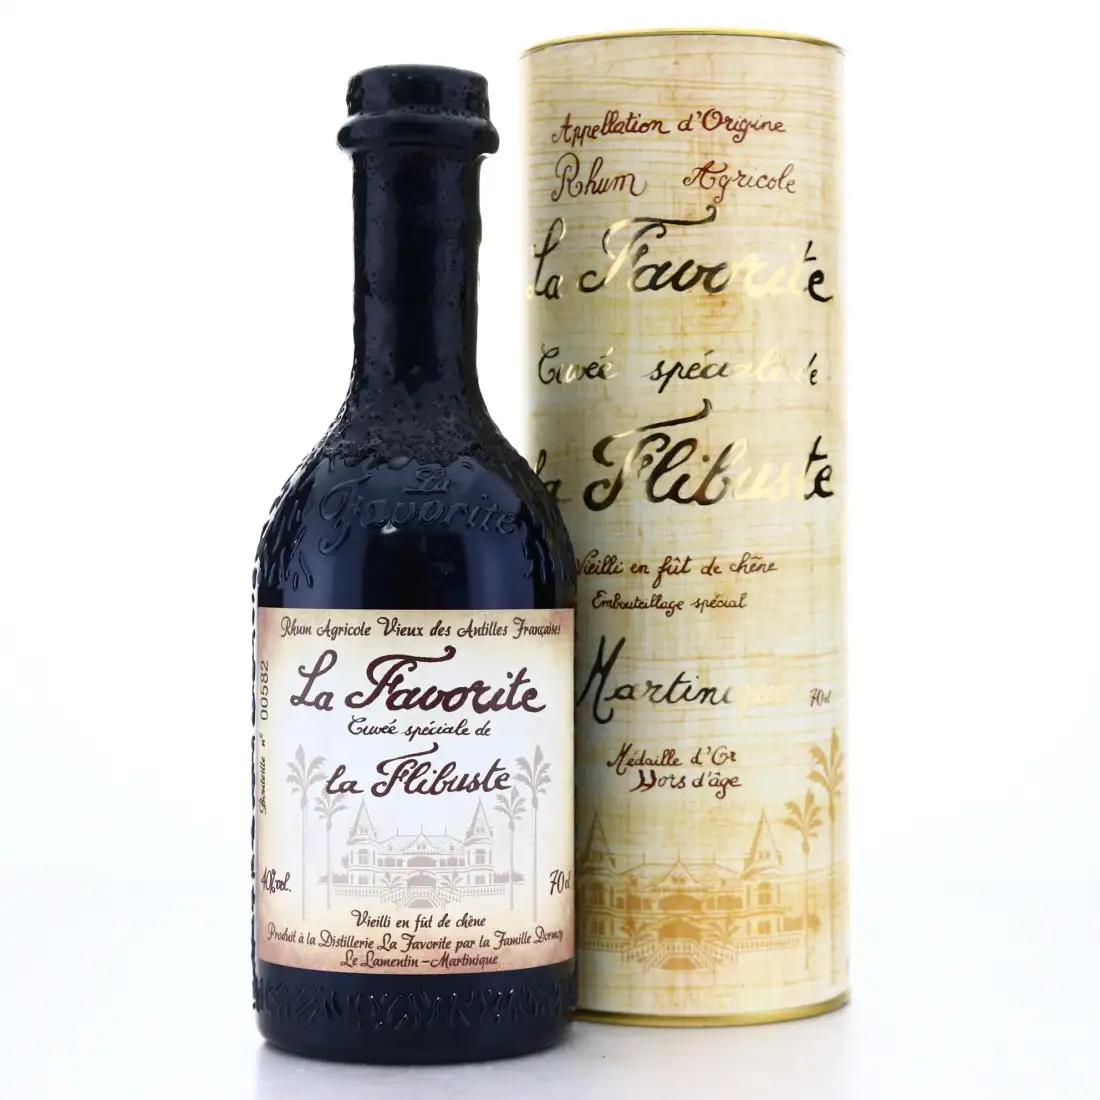 Image of the front of the bottle of the rum La Flibuste